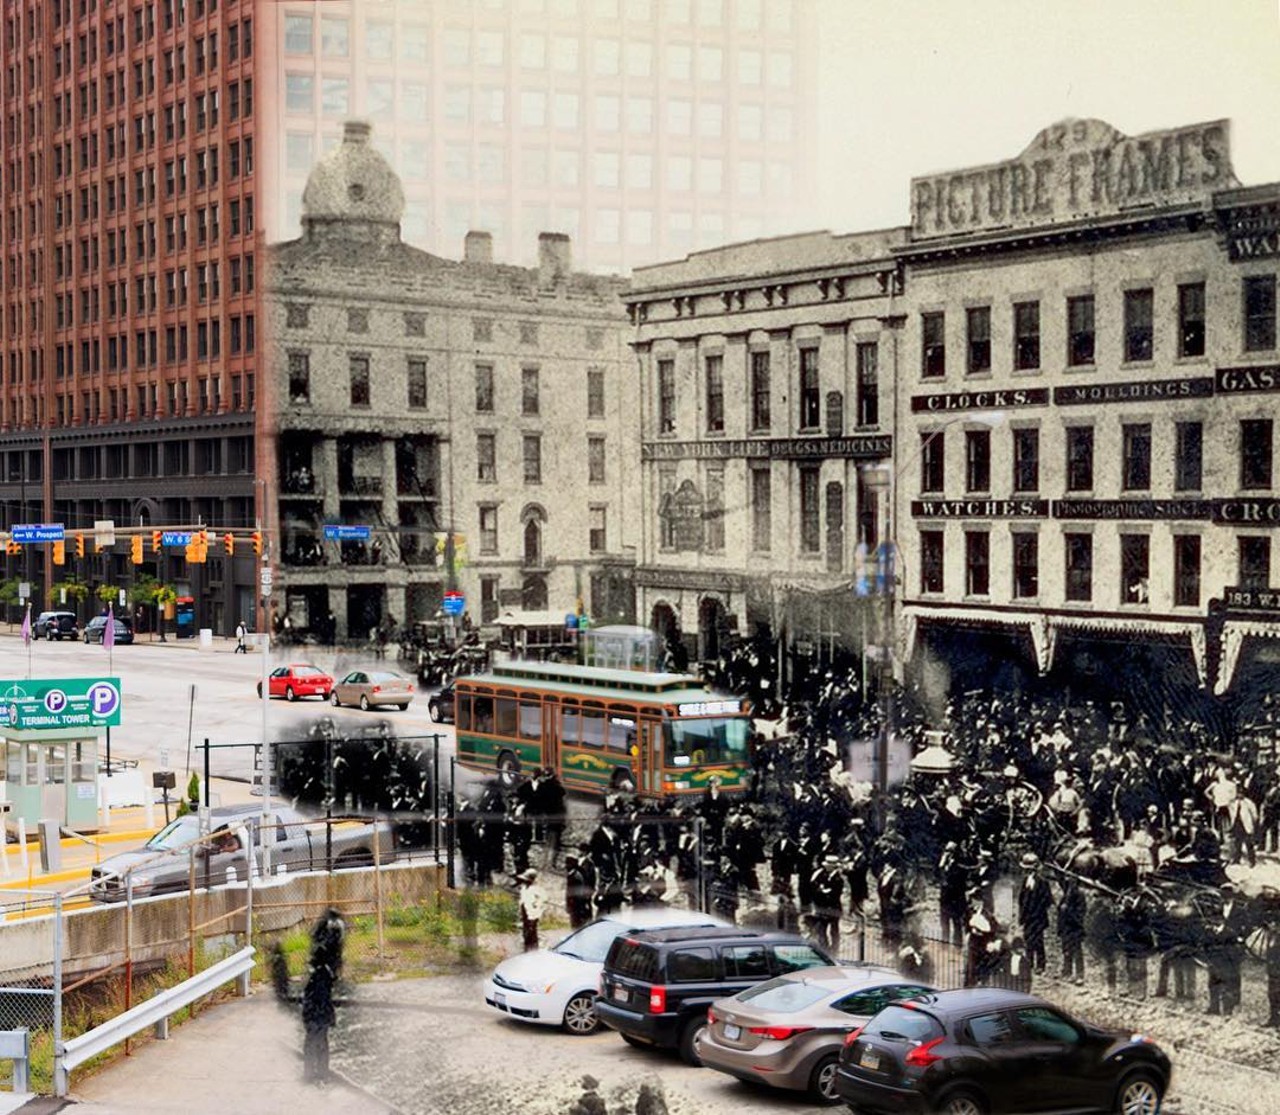 Cleveland, 1870/2016 - Superior Ave & Bank St (W. 6th). The Rockefeller Bldg now stands on the site of the former Weddell House hotel.